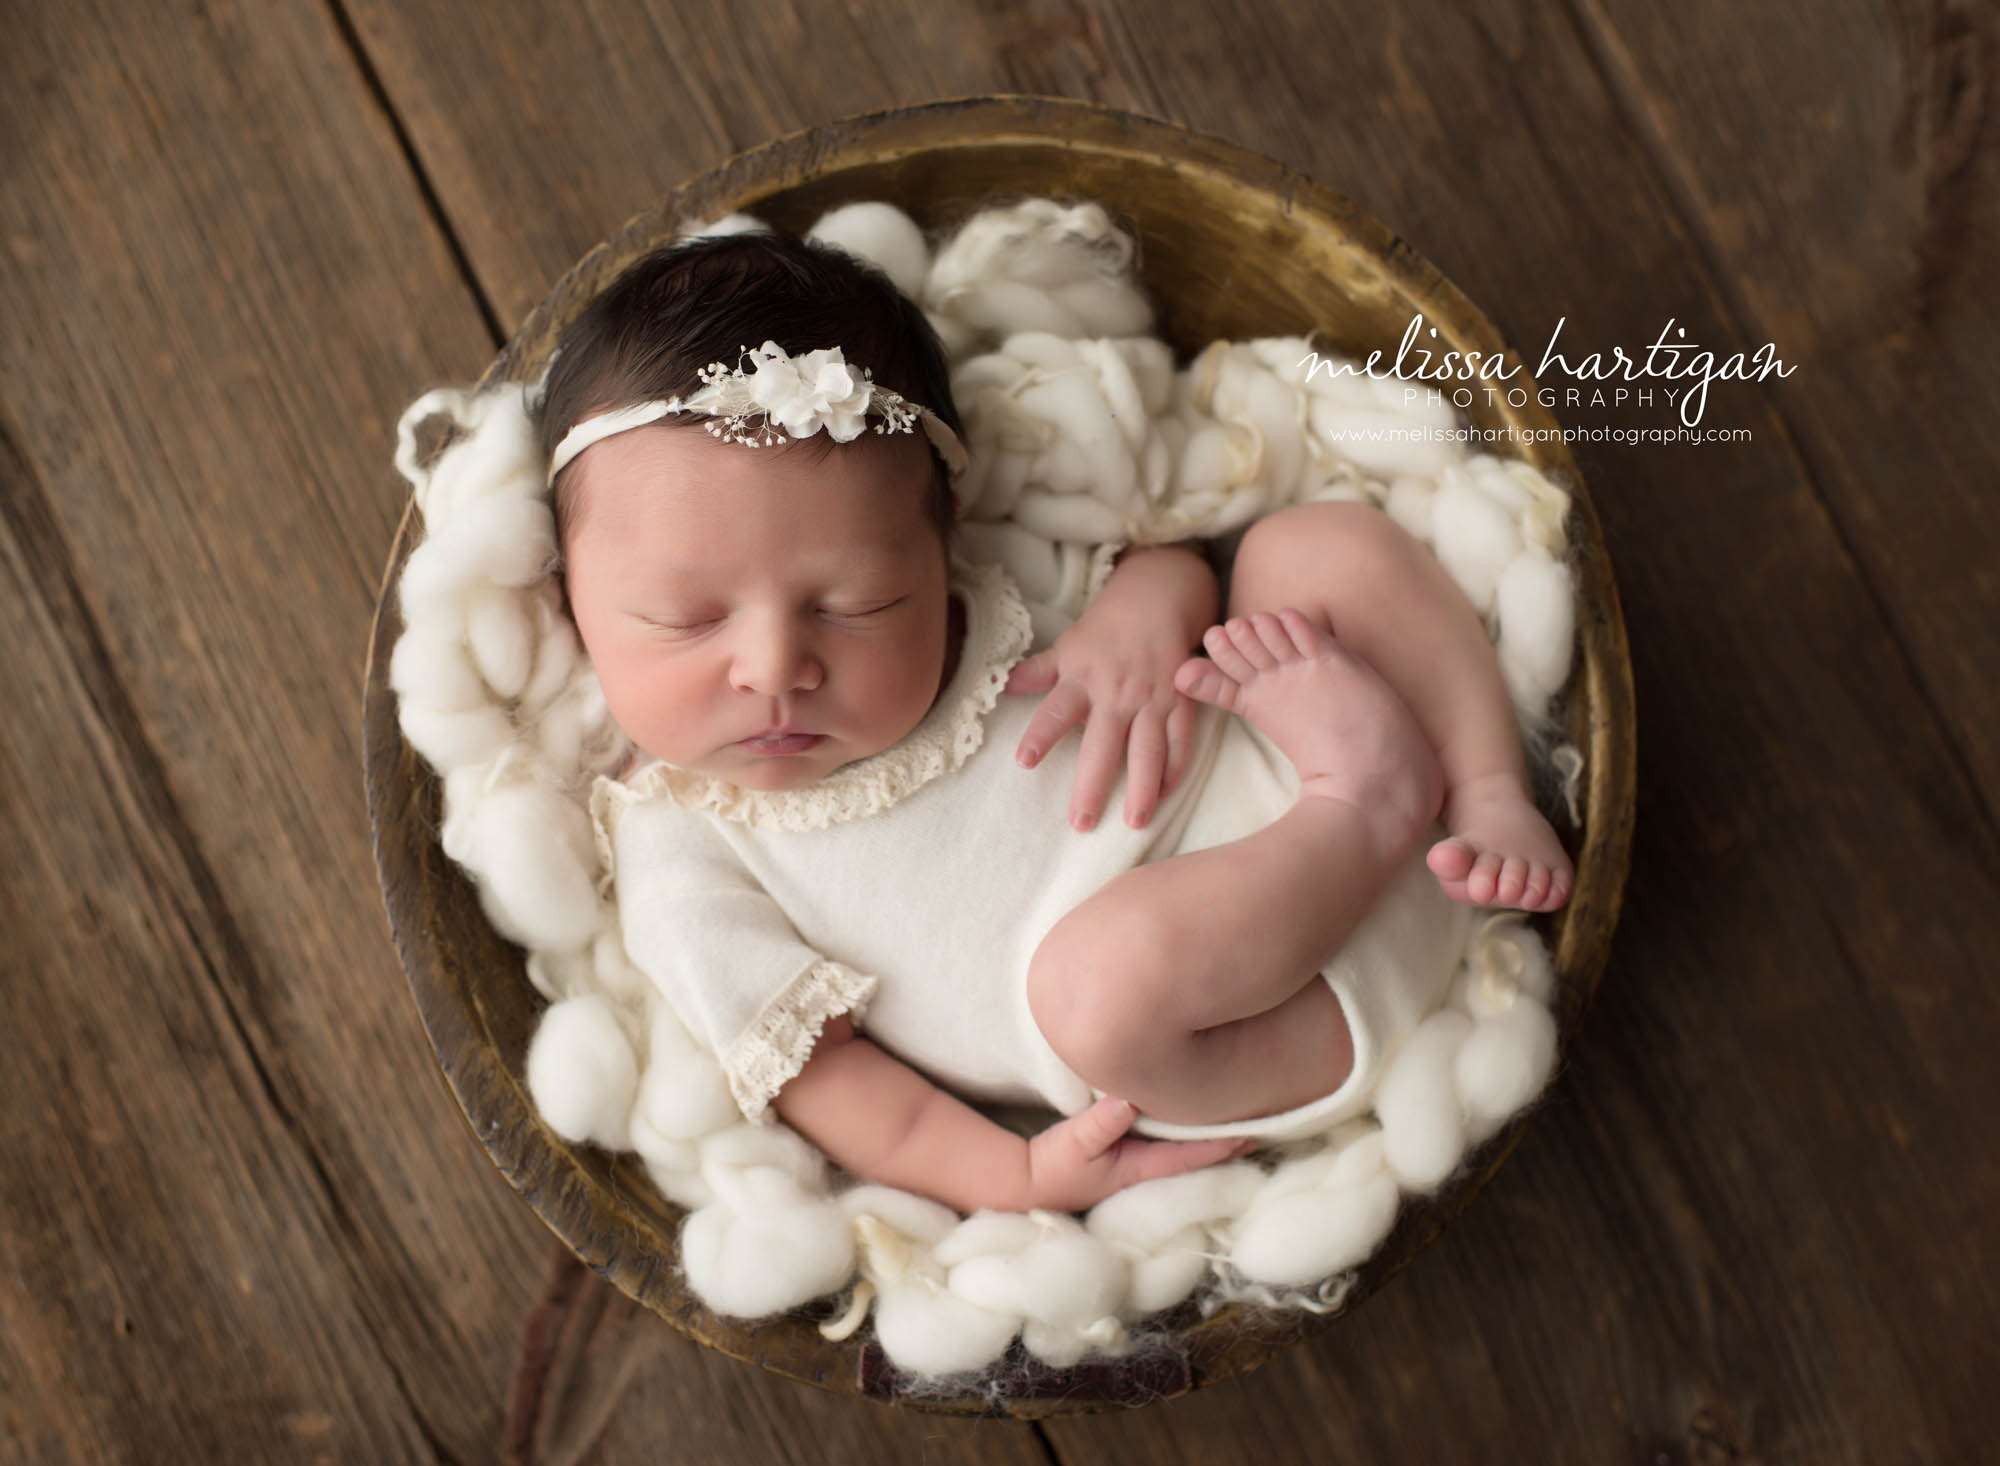 Melissa Hartigan Photography Connecticut Newborn Photographer trumbull Ct baby Fairfield county Baby girl white knit onesie and headband in wooden bowl sleeping CT mini newborn session